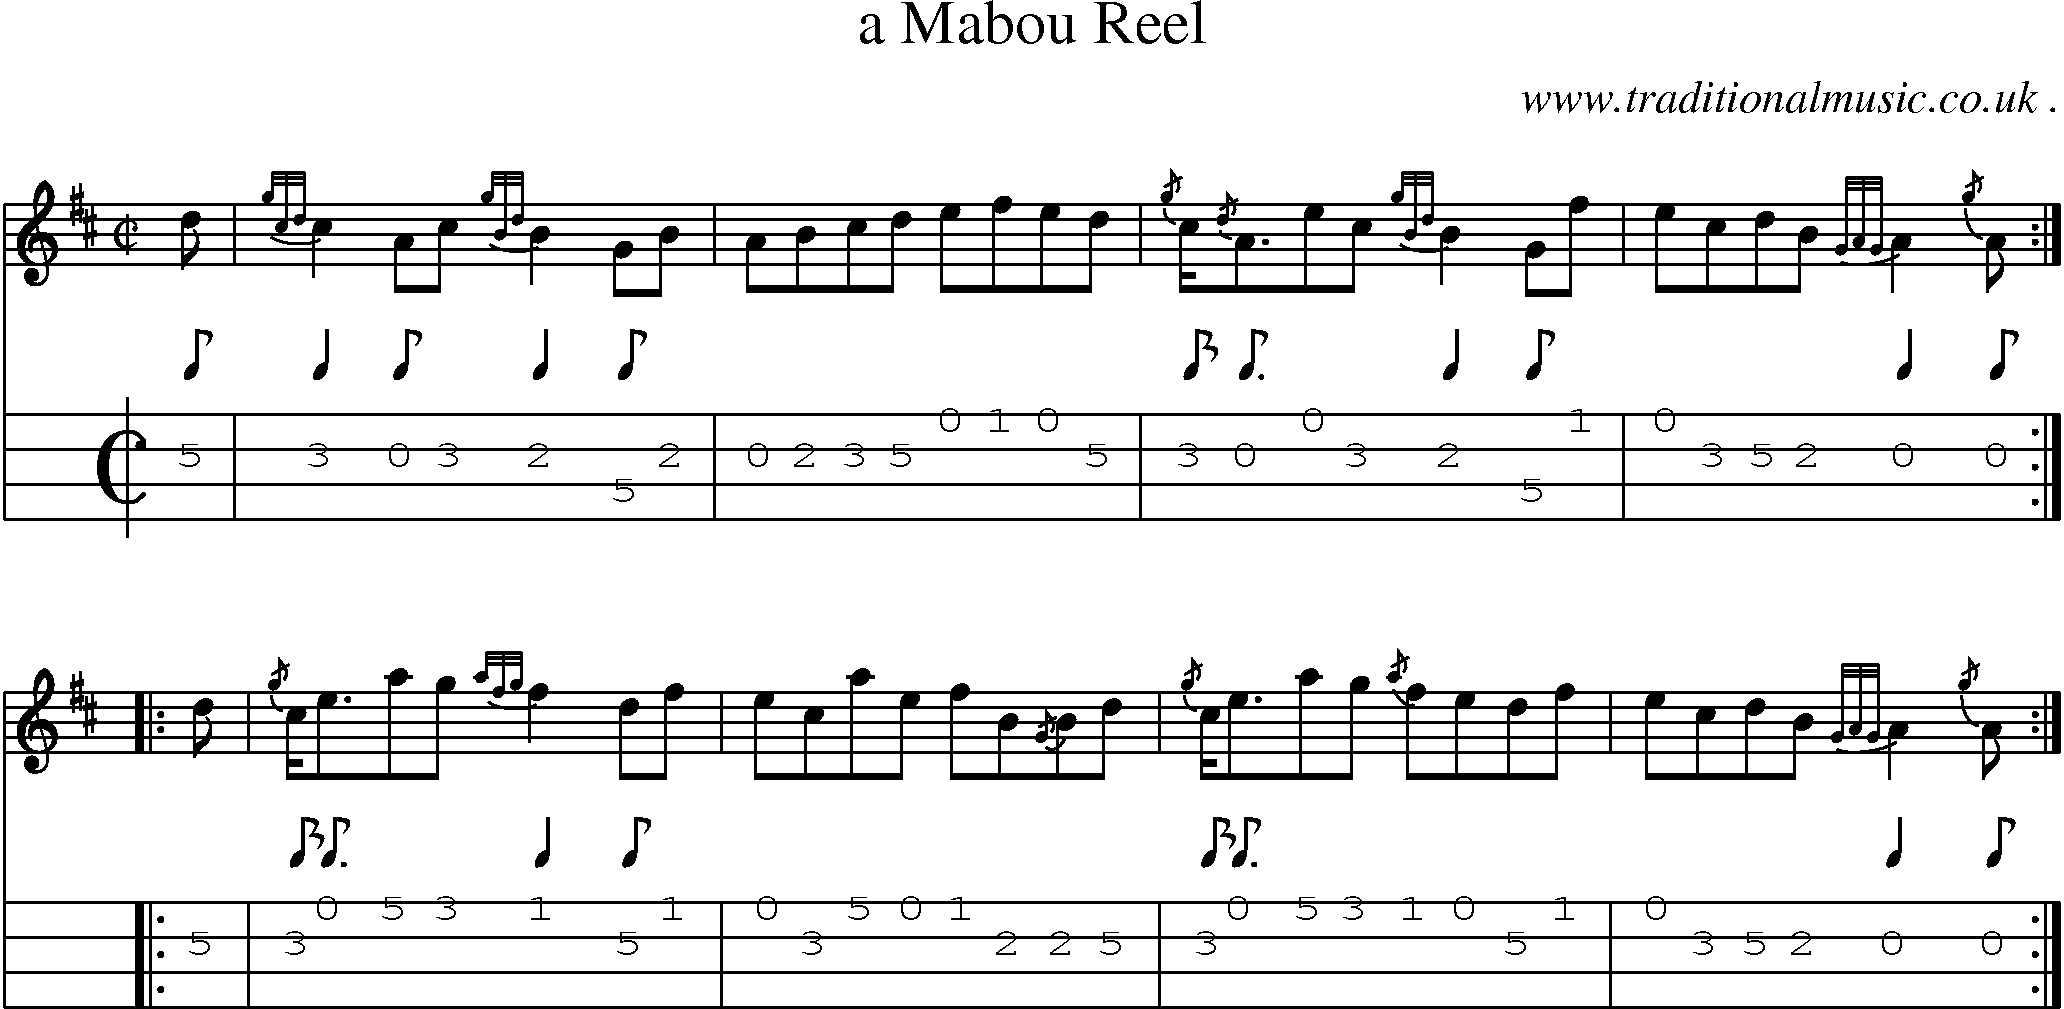 Sheet-music  score, Chords and Mandolin Tabs for A Mabou Reel